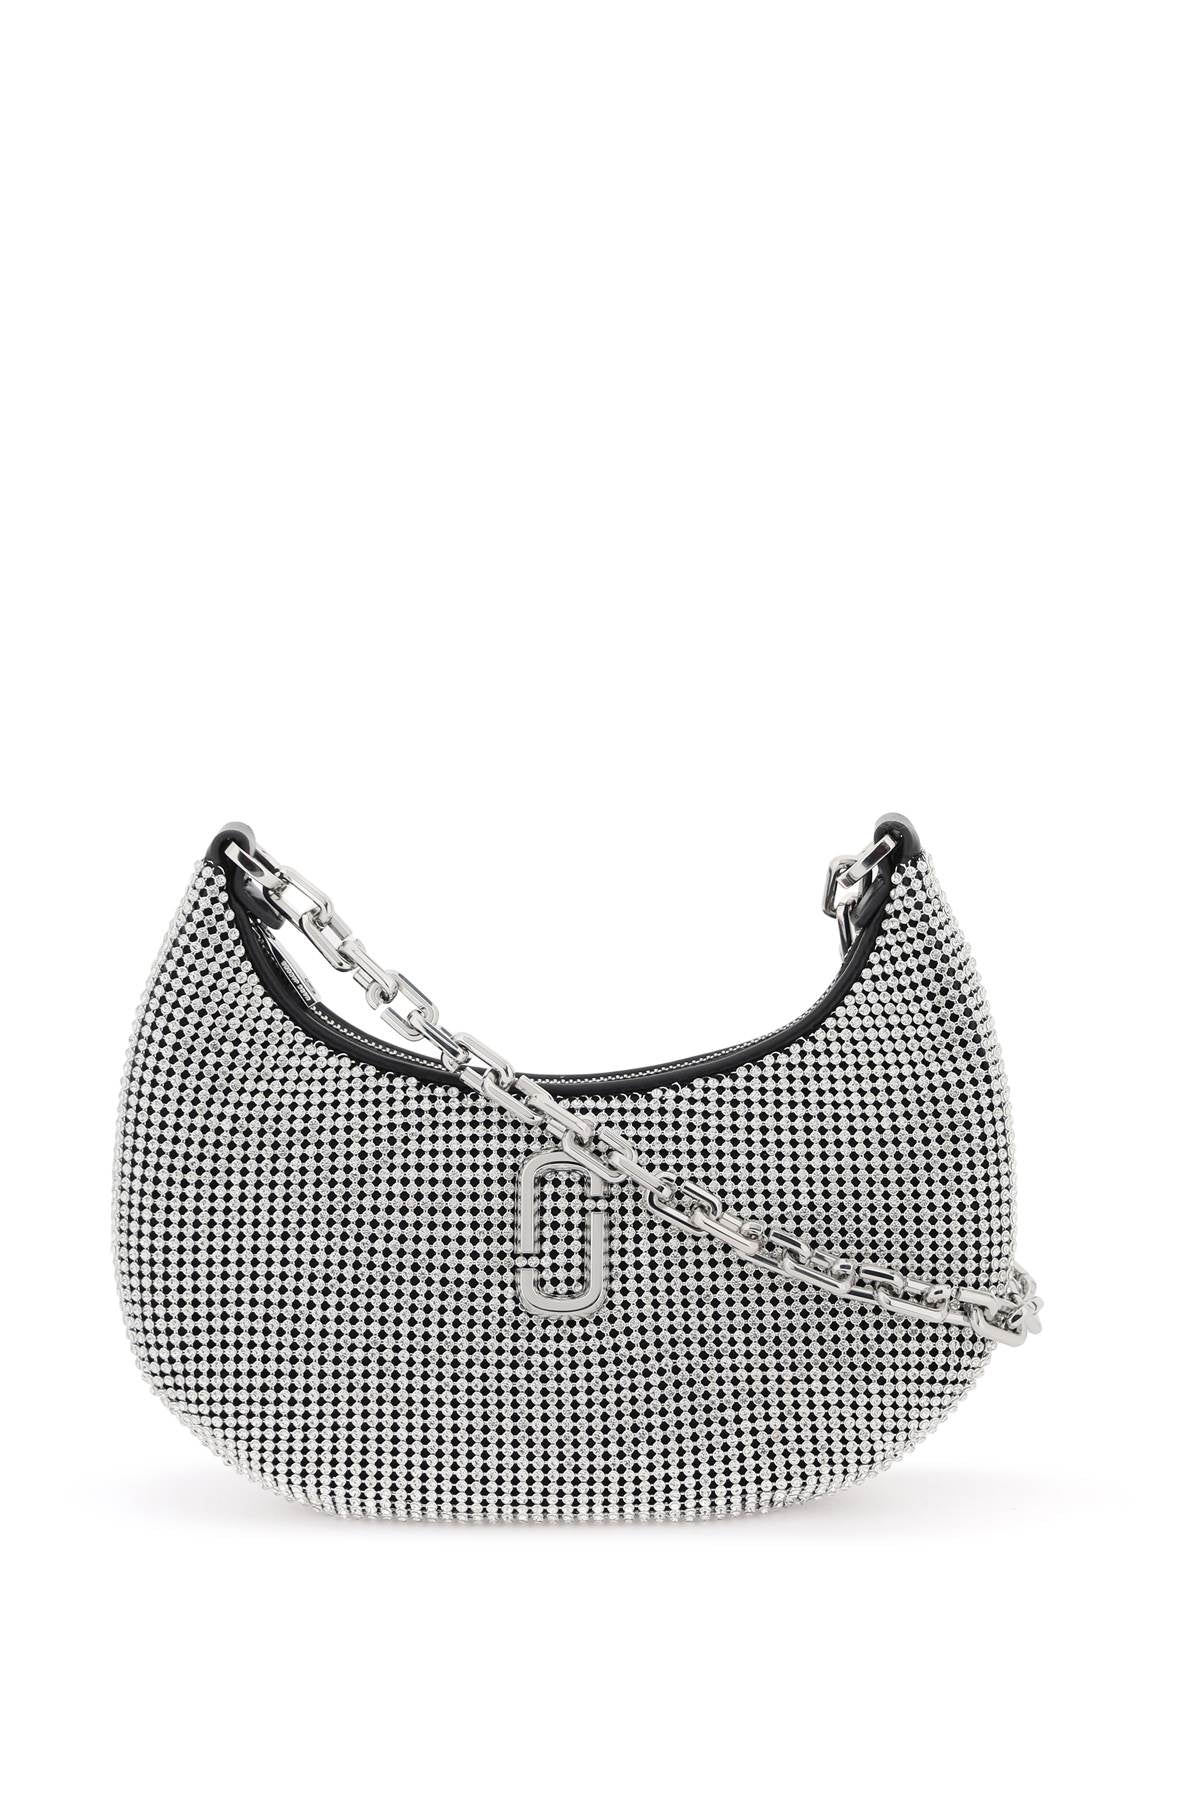 MARC JACOBS Multicolor Rhinestone Embellished Mini Curve Shoulder Bag with Leather Trim and Chain Strap